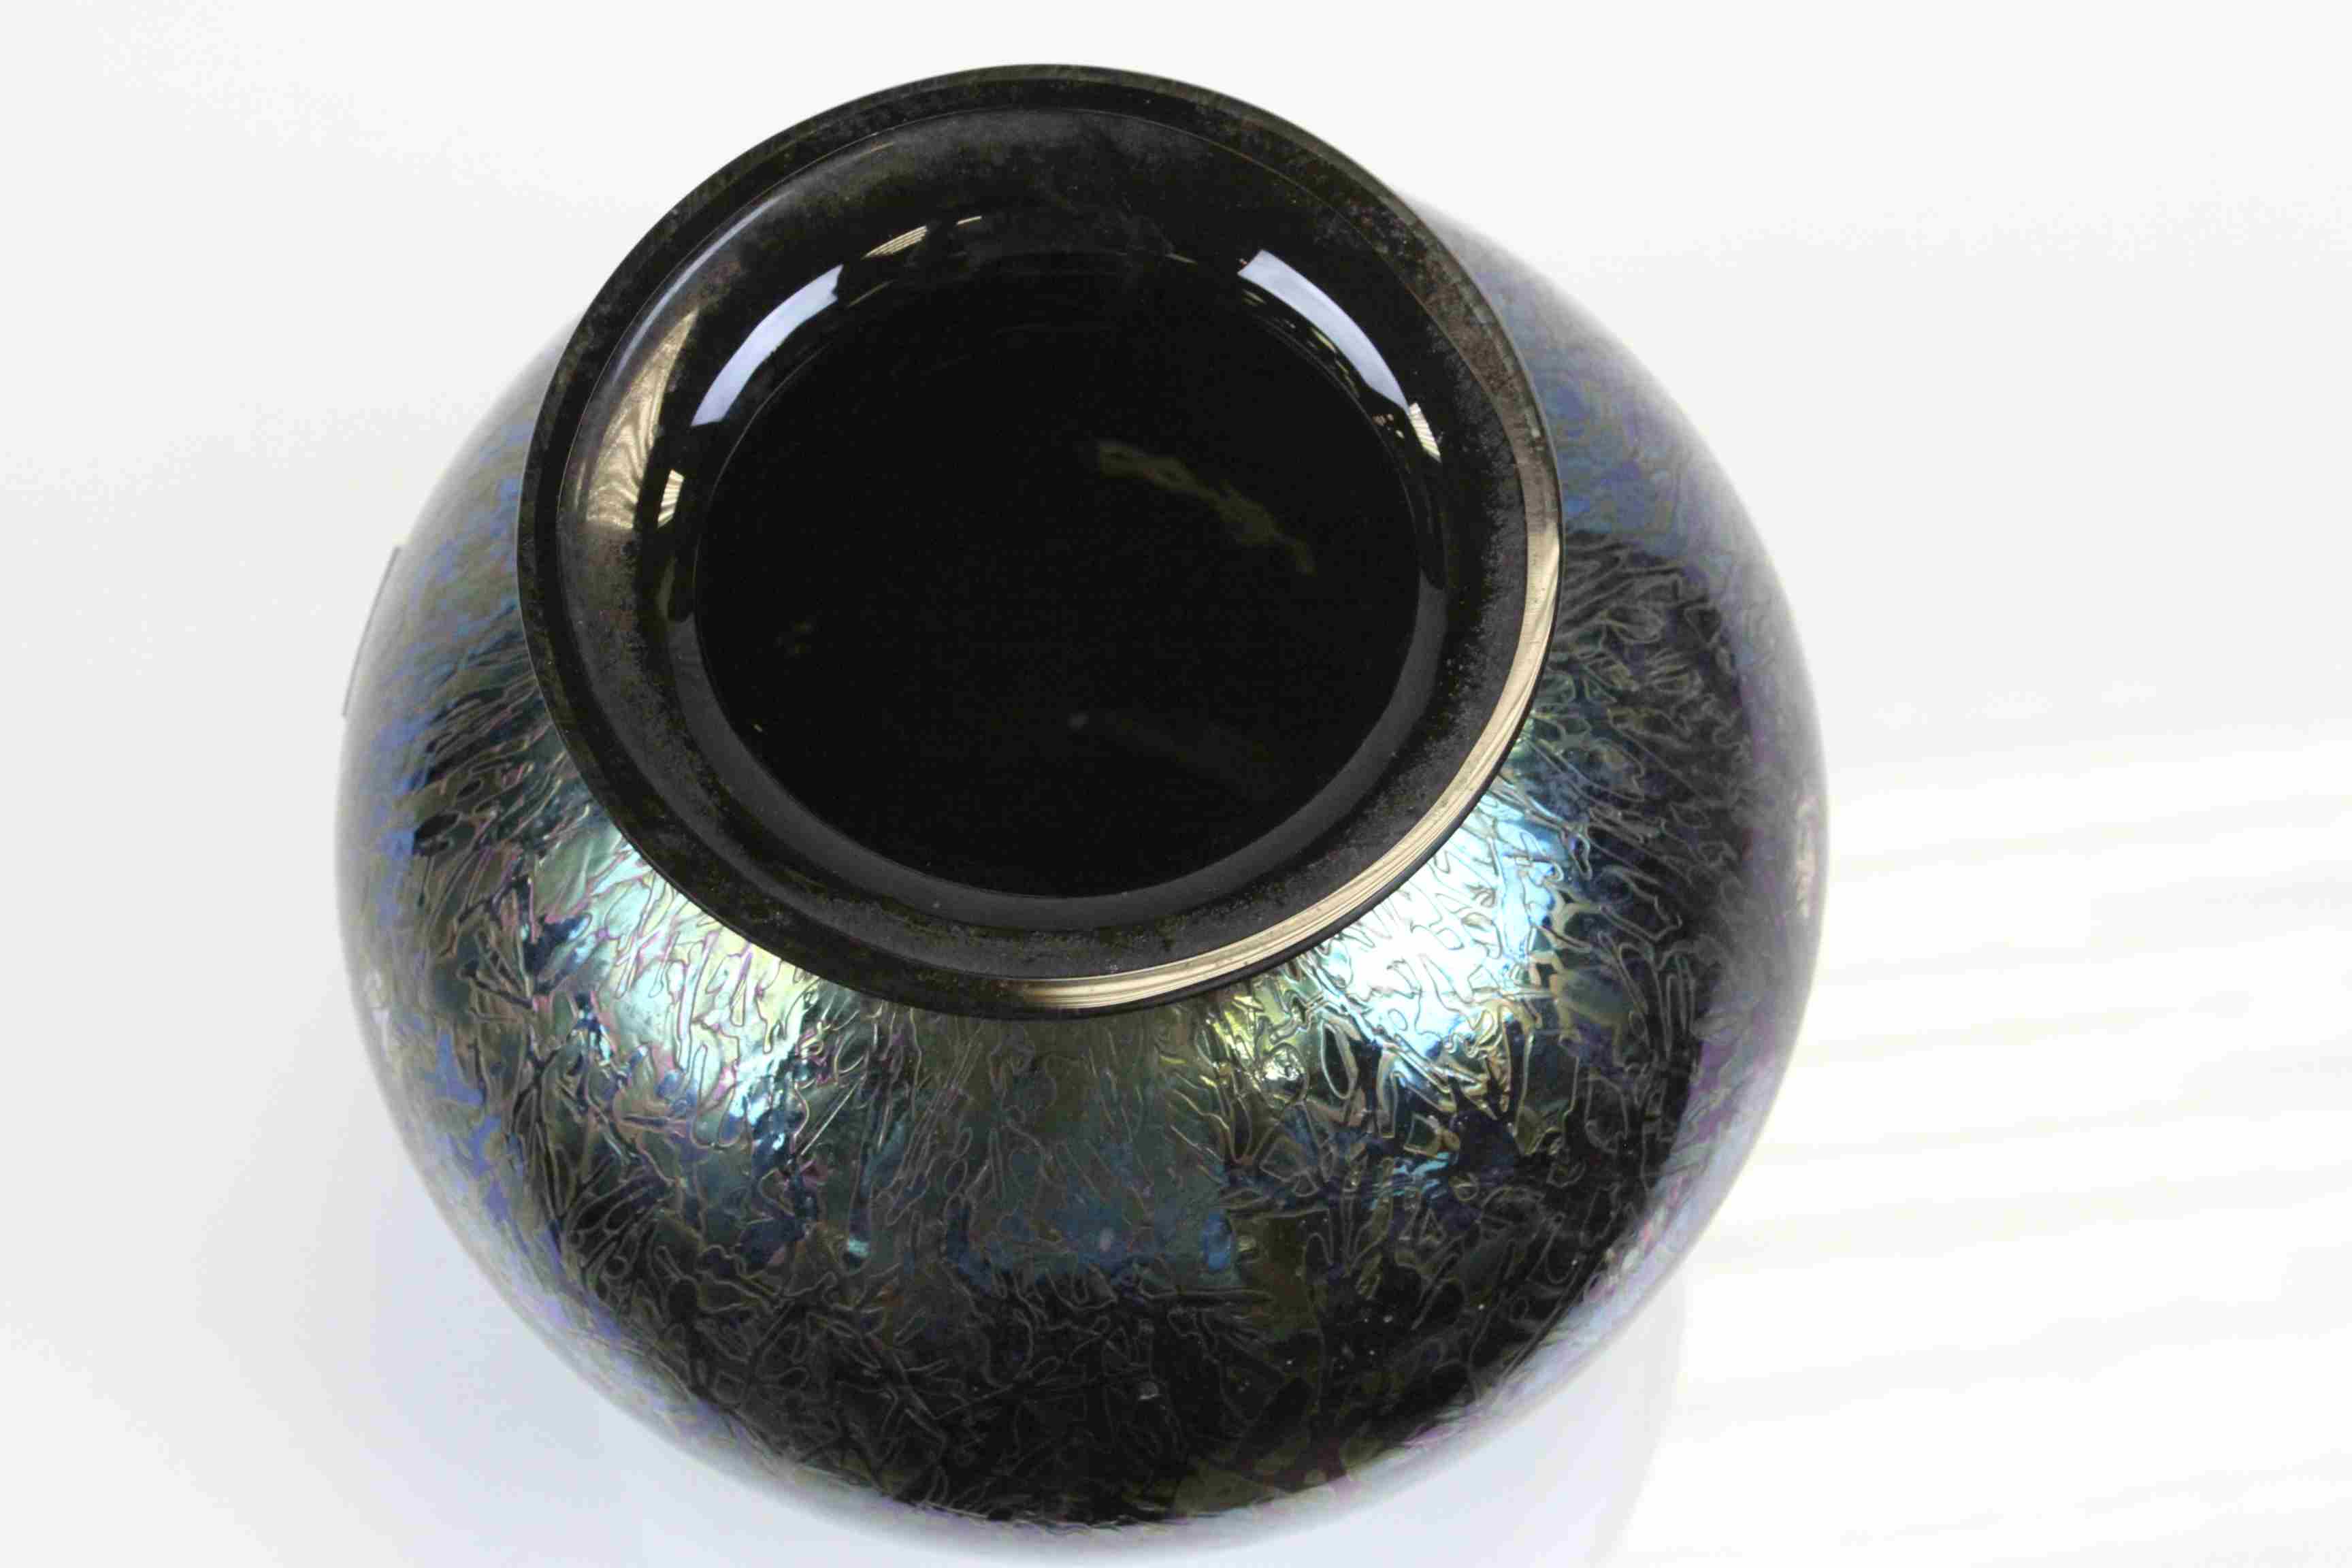 Royal Brierley Art Glass vase with Irridescent finish - Image 4 of 4